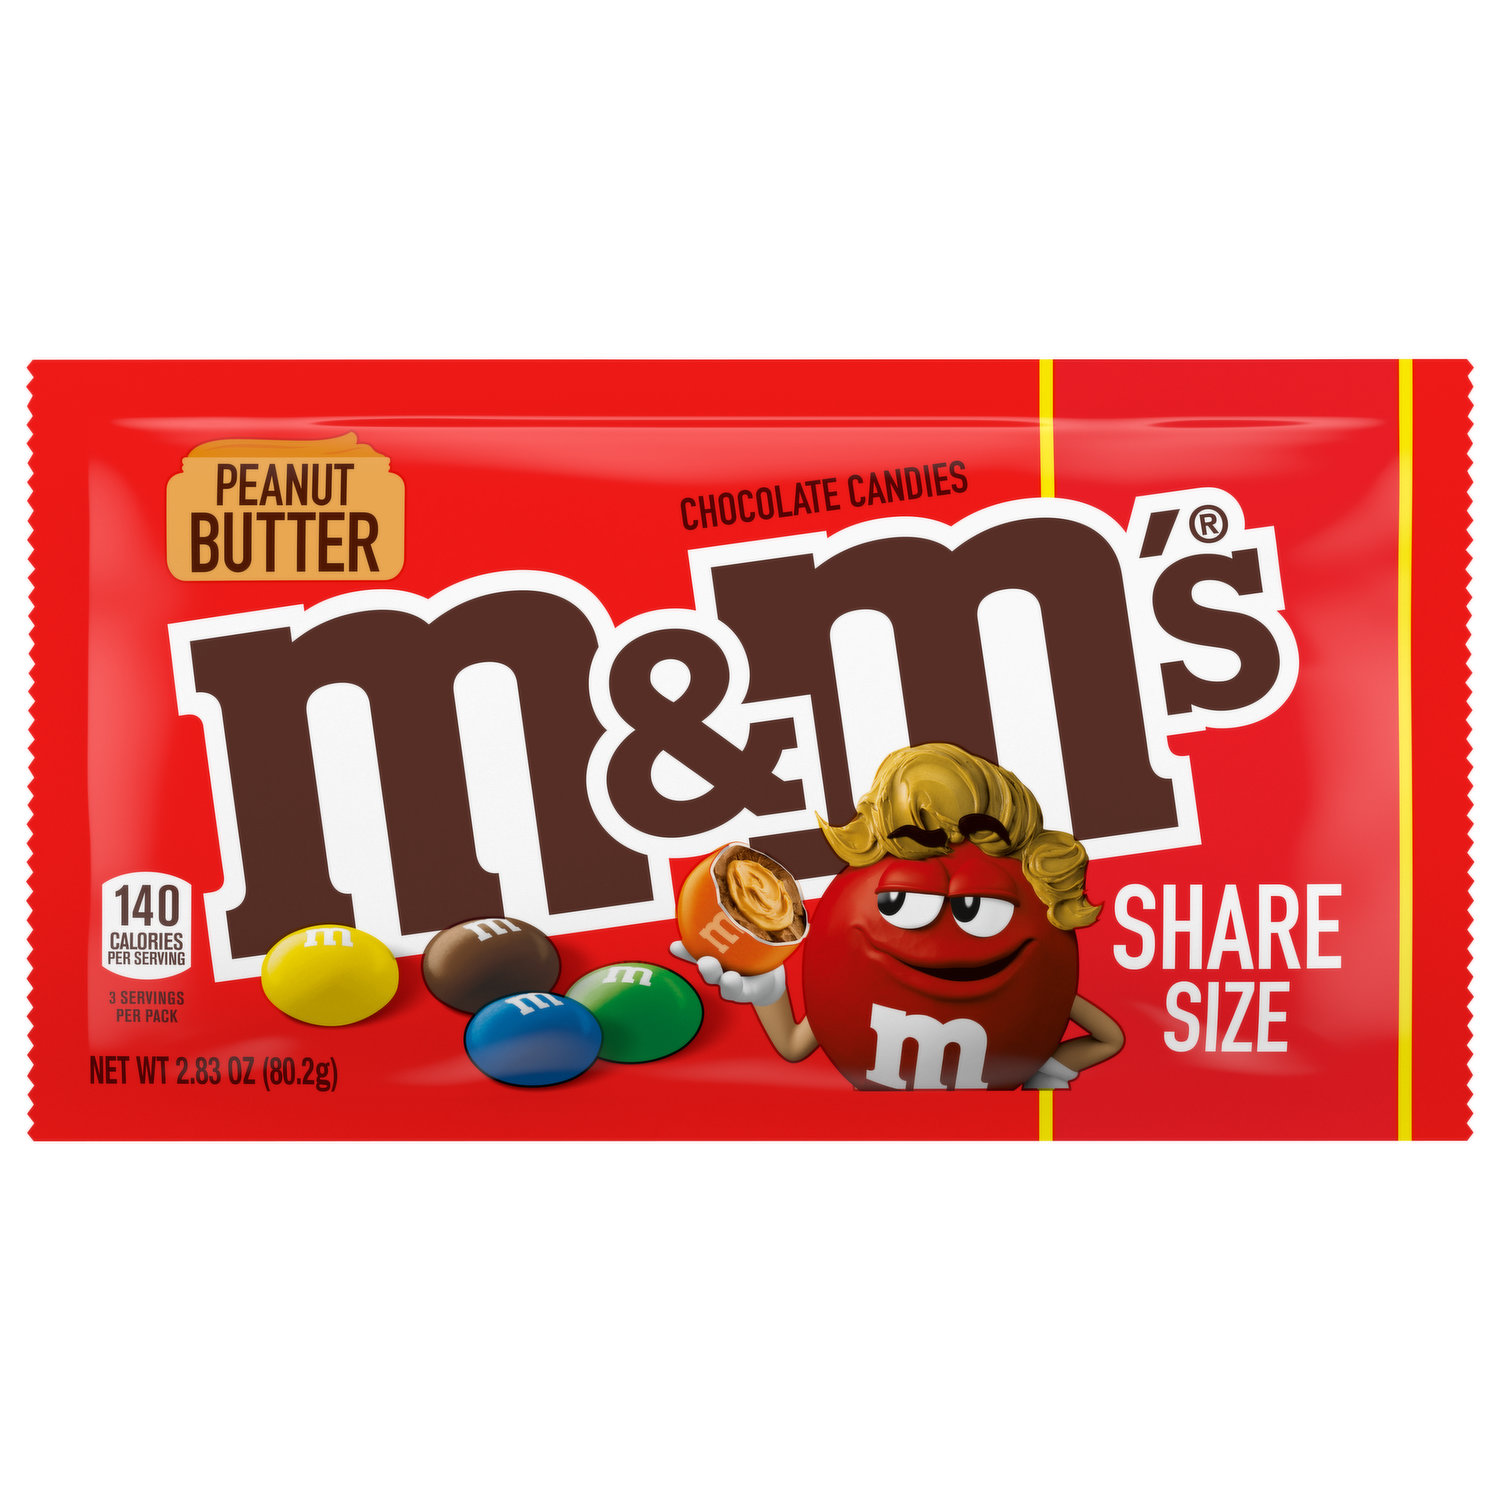 M&M's Peanut Butter, Red, White & Blue Mix, Sharing Size